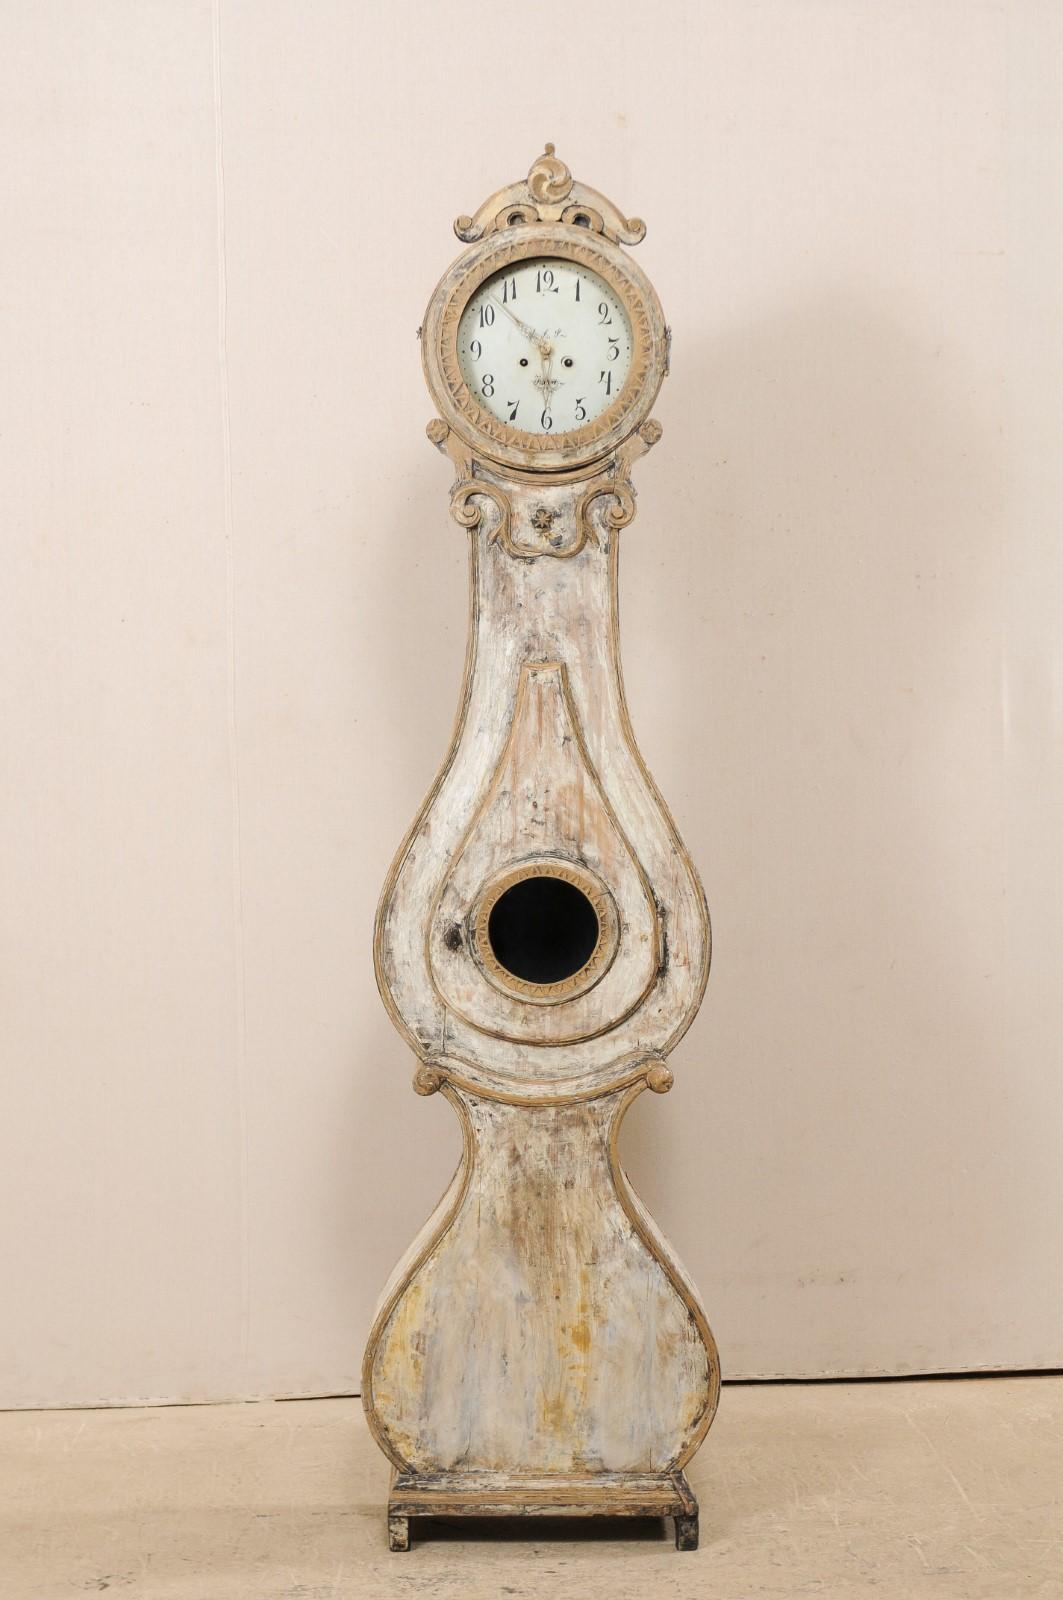 A 19th century Swedish Fryksdahl grandfather clock. This antique Fryksdahl clock from Sweden features a beautifully raised and carved crest, petite flowers on either end of a swag molding and volute accents at the neck with a central star. The